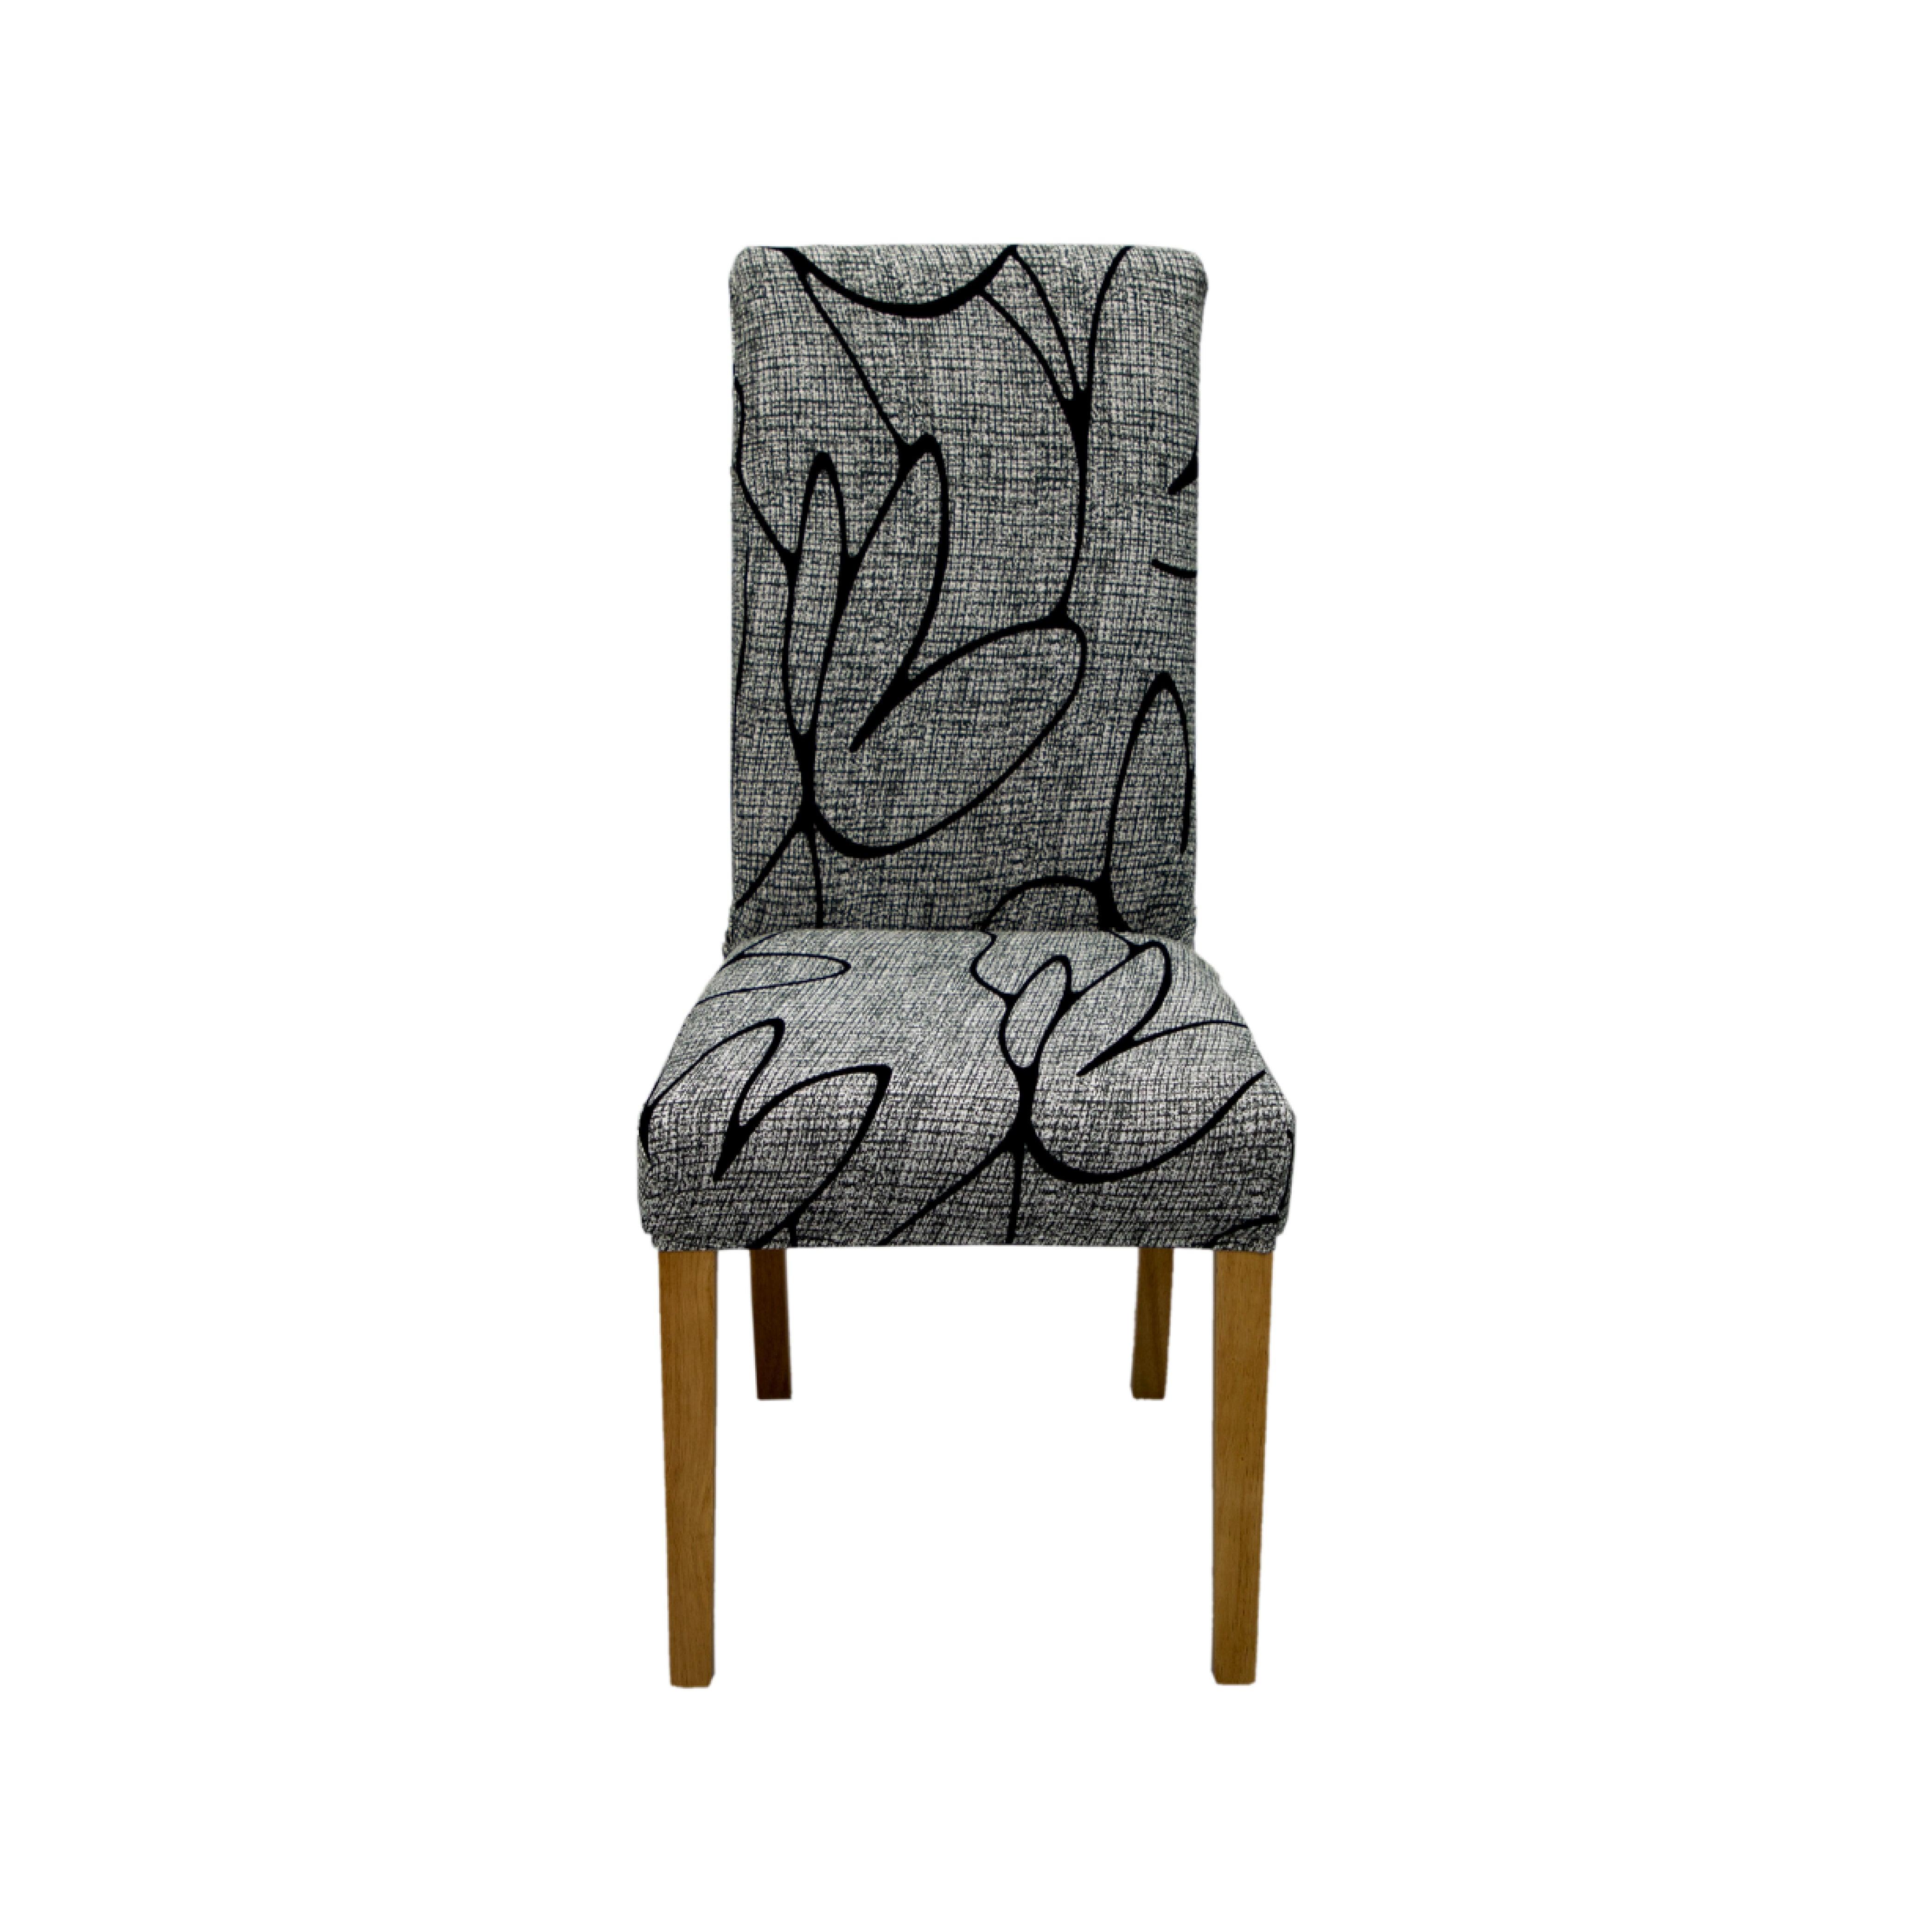 Hyper Cover Stretch Dining Chair Covers with Patterns Mild Lotus | Chair Covers | Brilliant Home Living